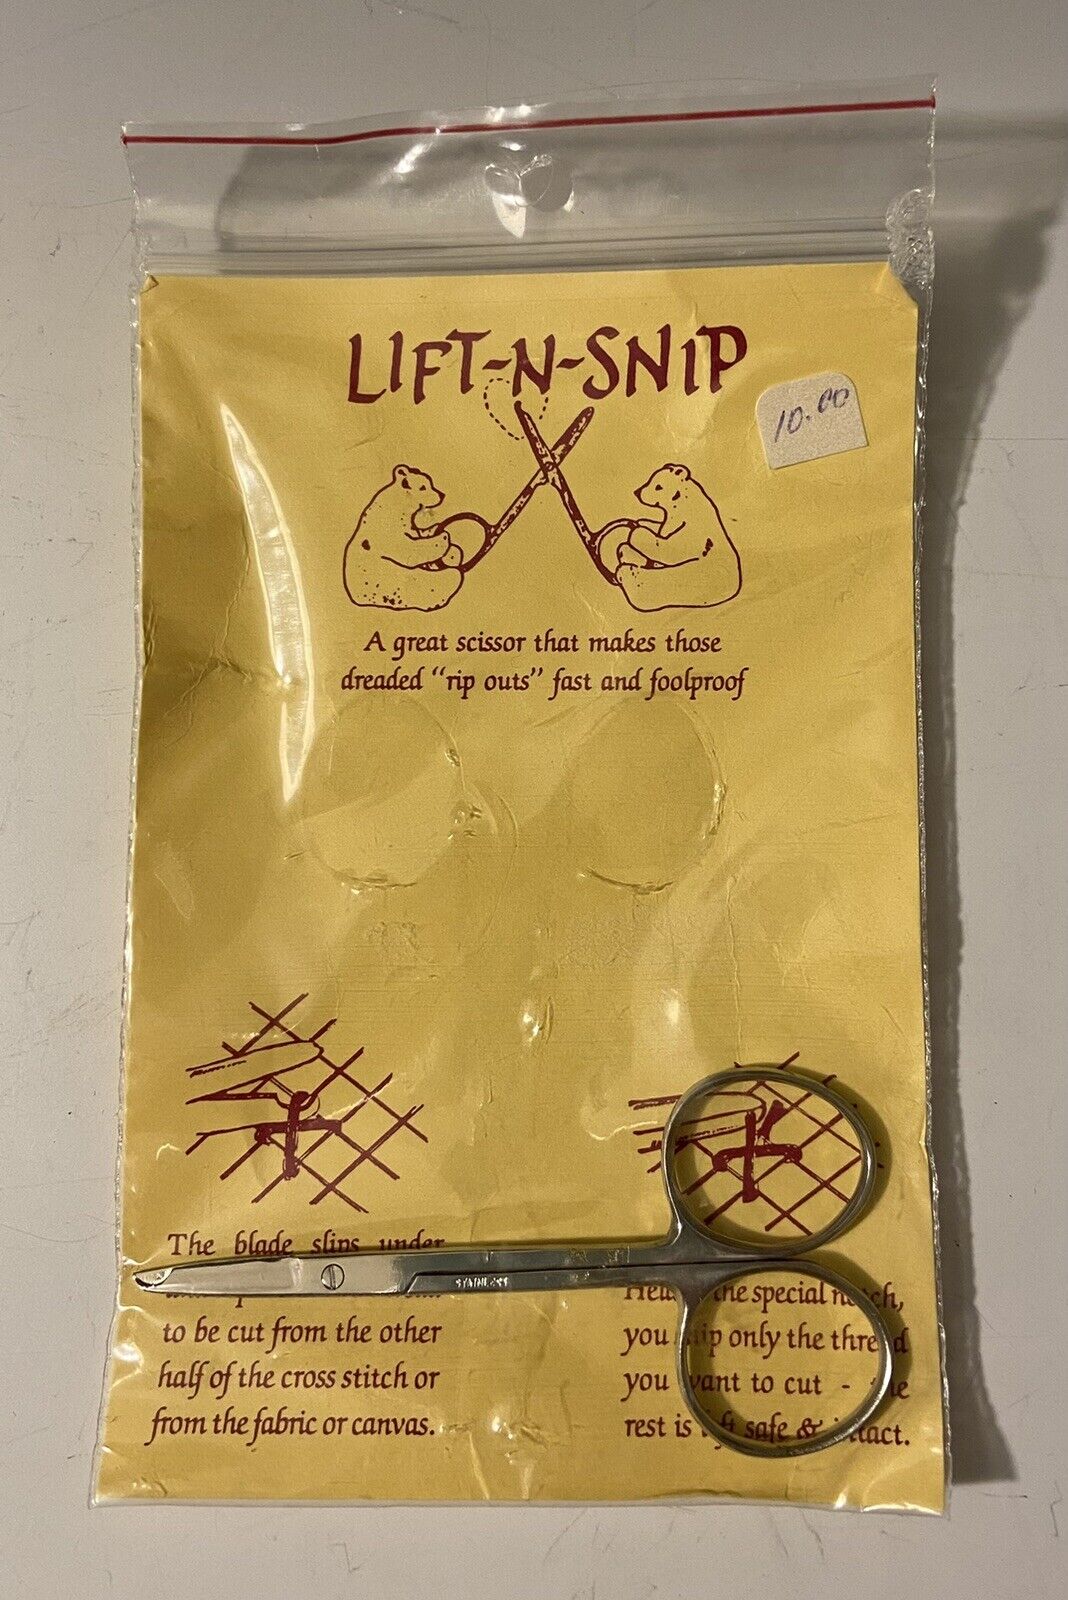 Lift-n-snip Scissor That Makes “rip Outs” Fast And Foolproof